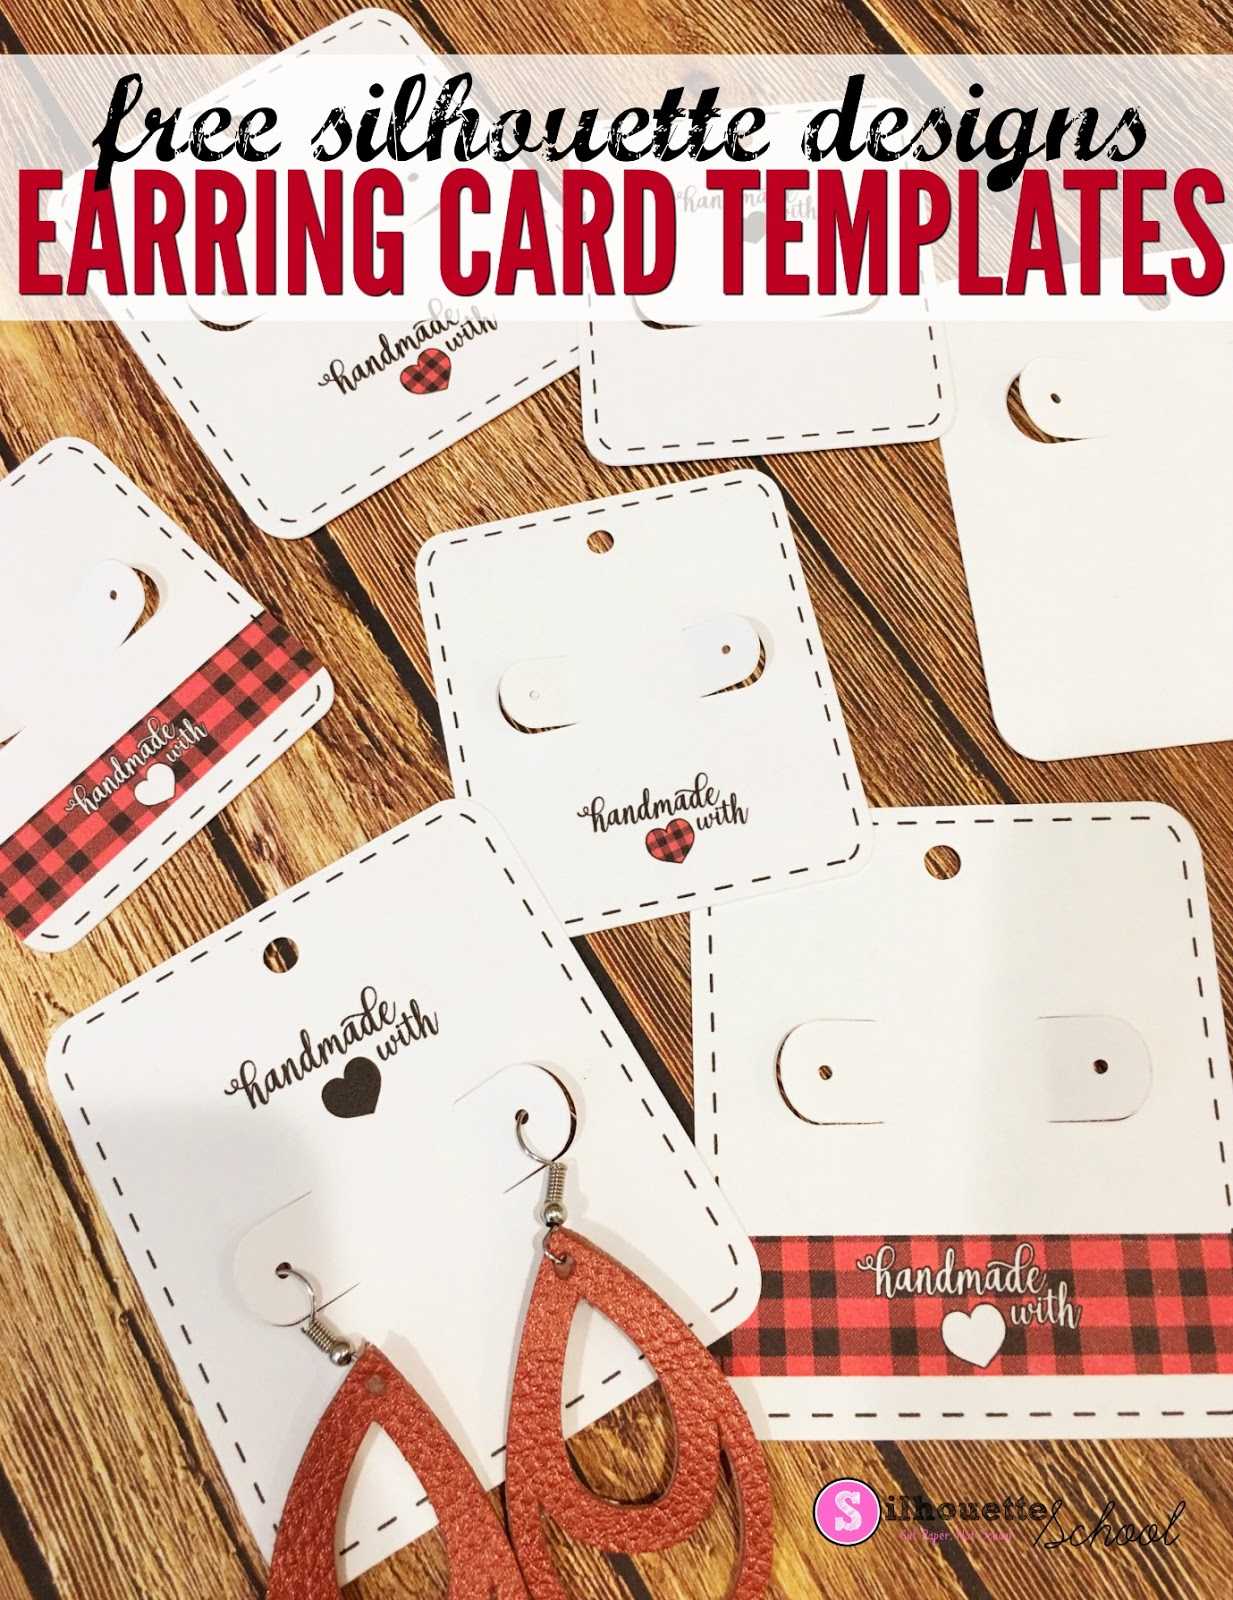 Free Silhouette Earring Card Templates (Set Of 8 Throughout Silhouette Cameo Card Templates